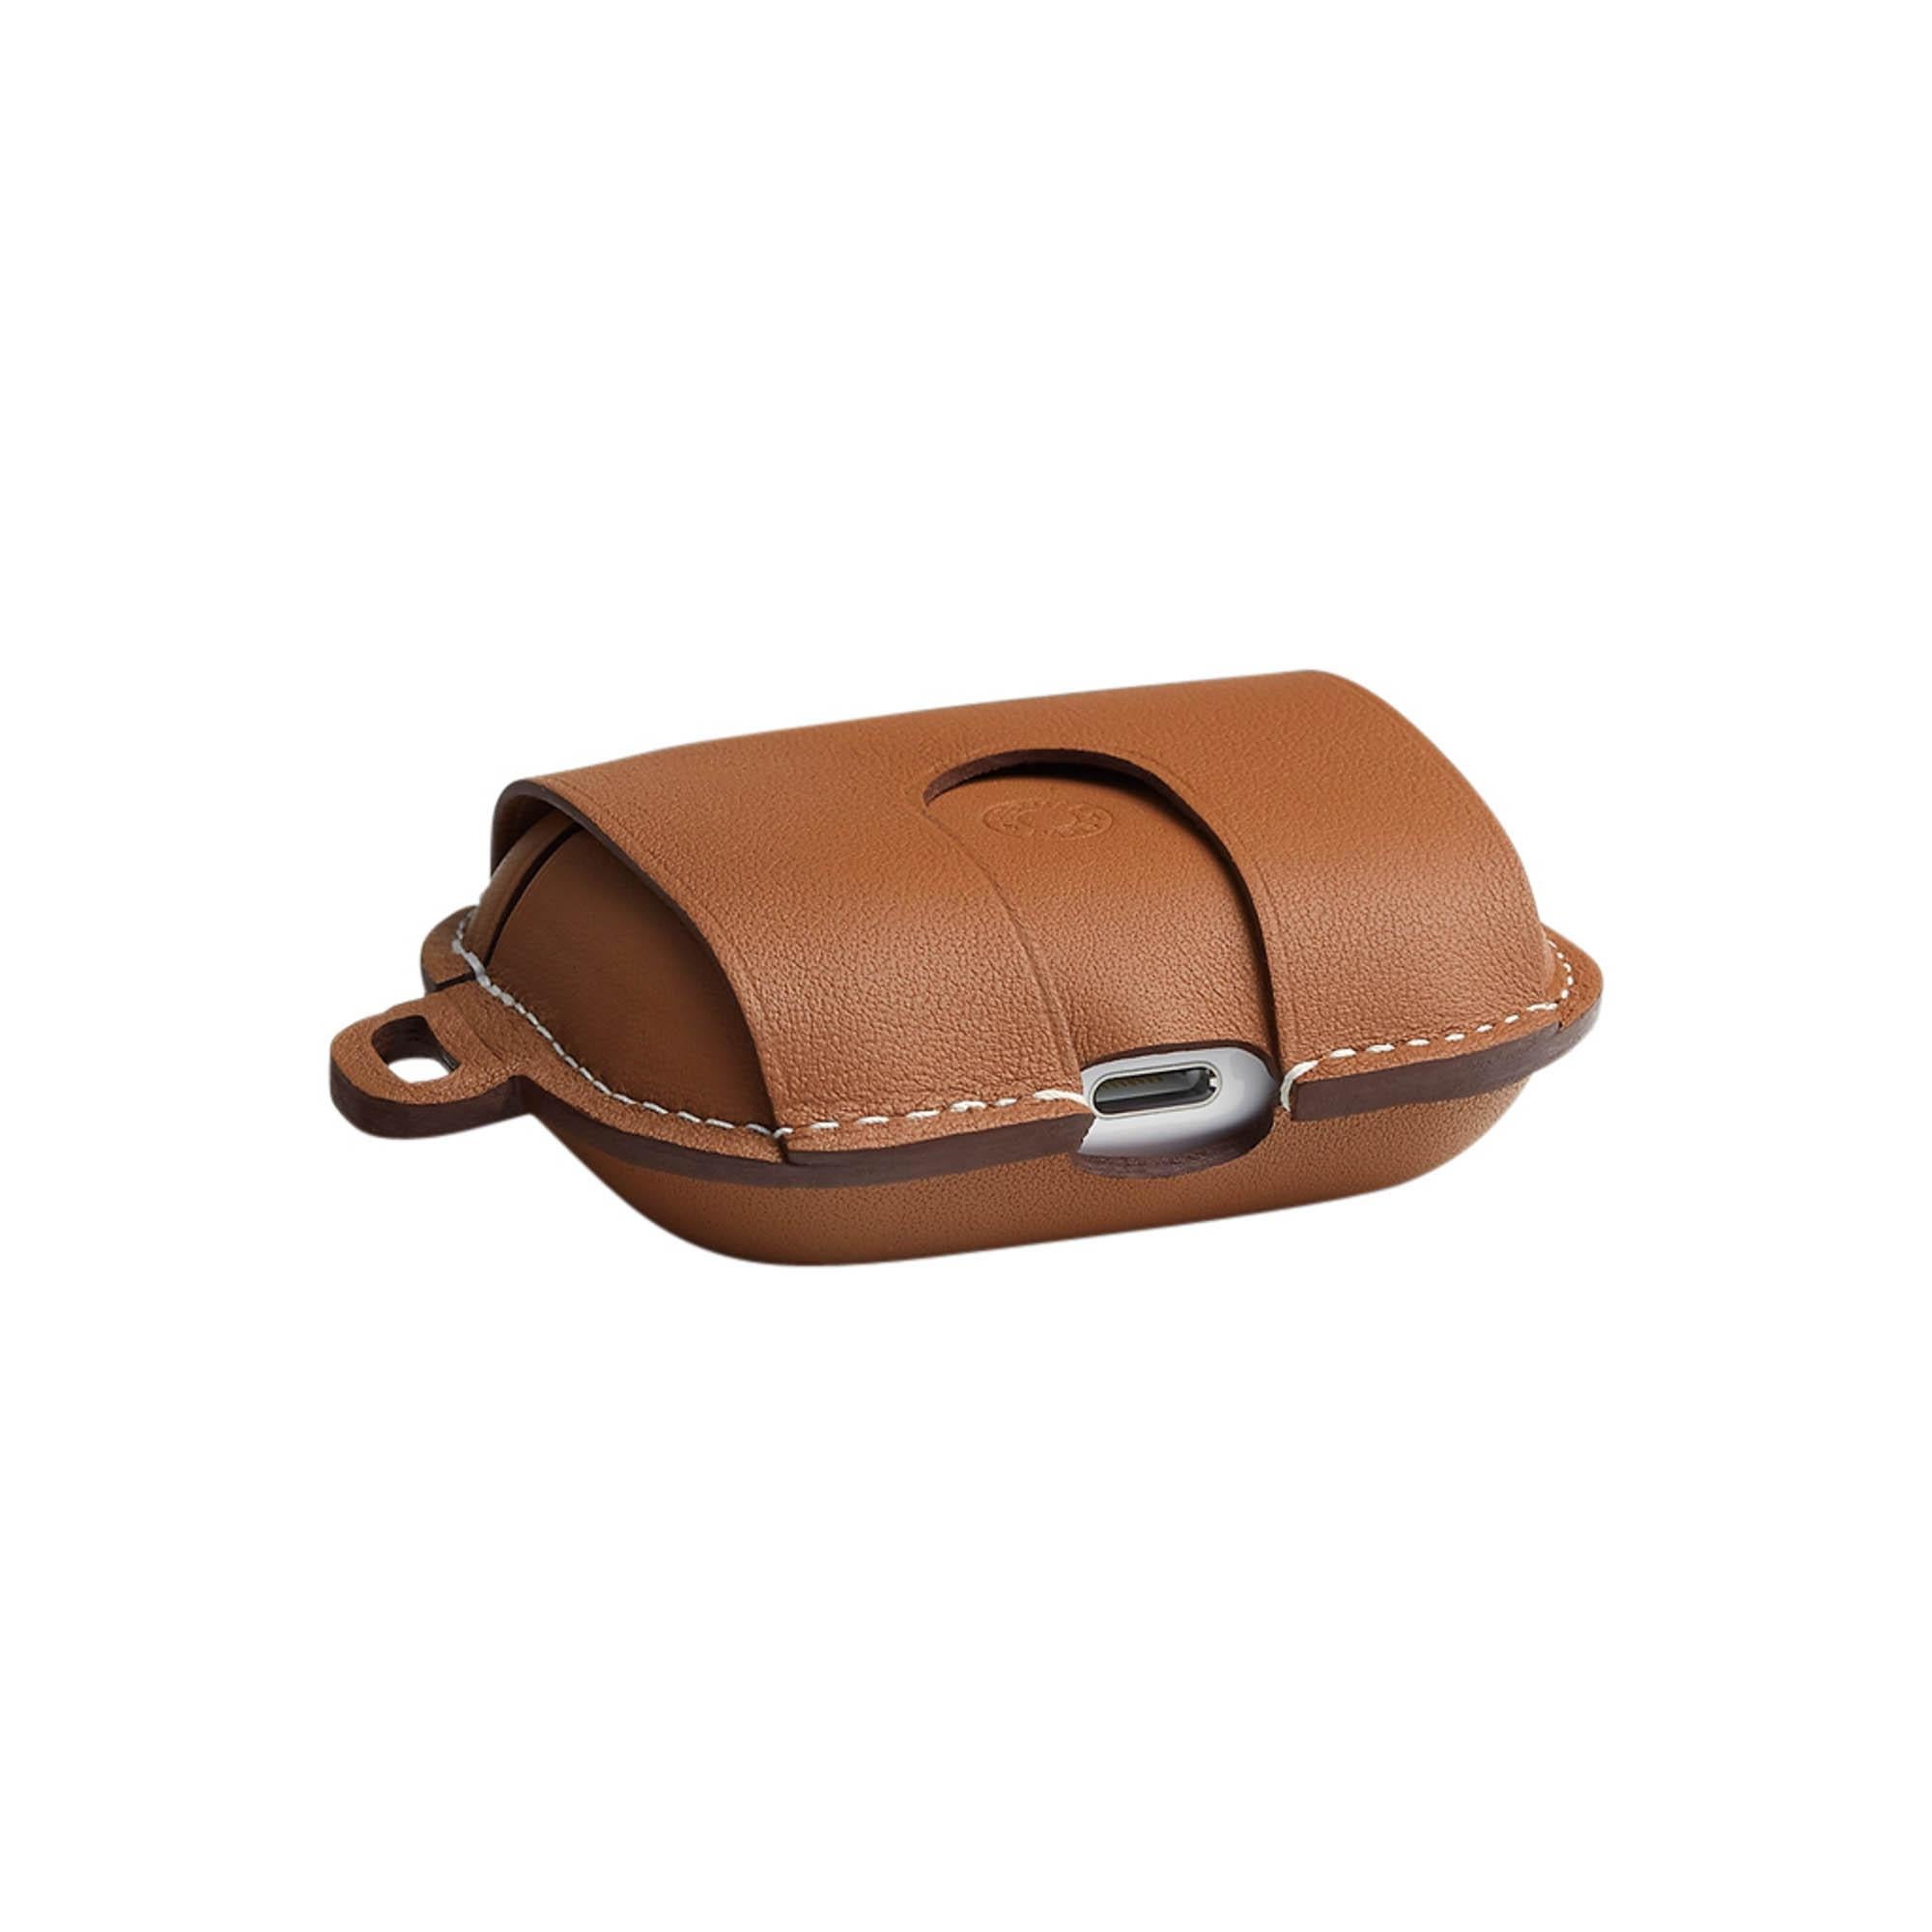 Mightychic offers Hermes Air Pods Pro Case featured in Gold.
Beautiful in swift calfskin with white topstitch.
This case is not only a visual delight but also compatible with all generations
of Air Pods Pro.
Equipped with a removable strap.
Beyond